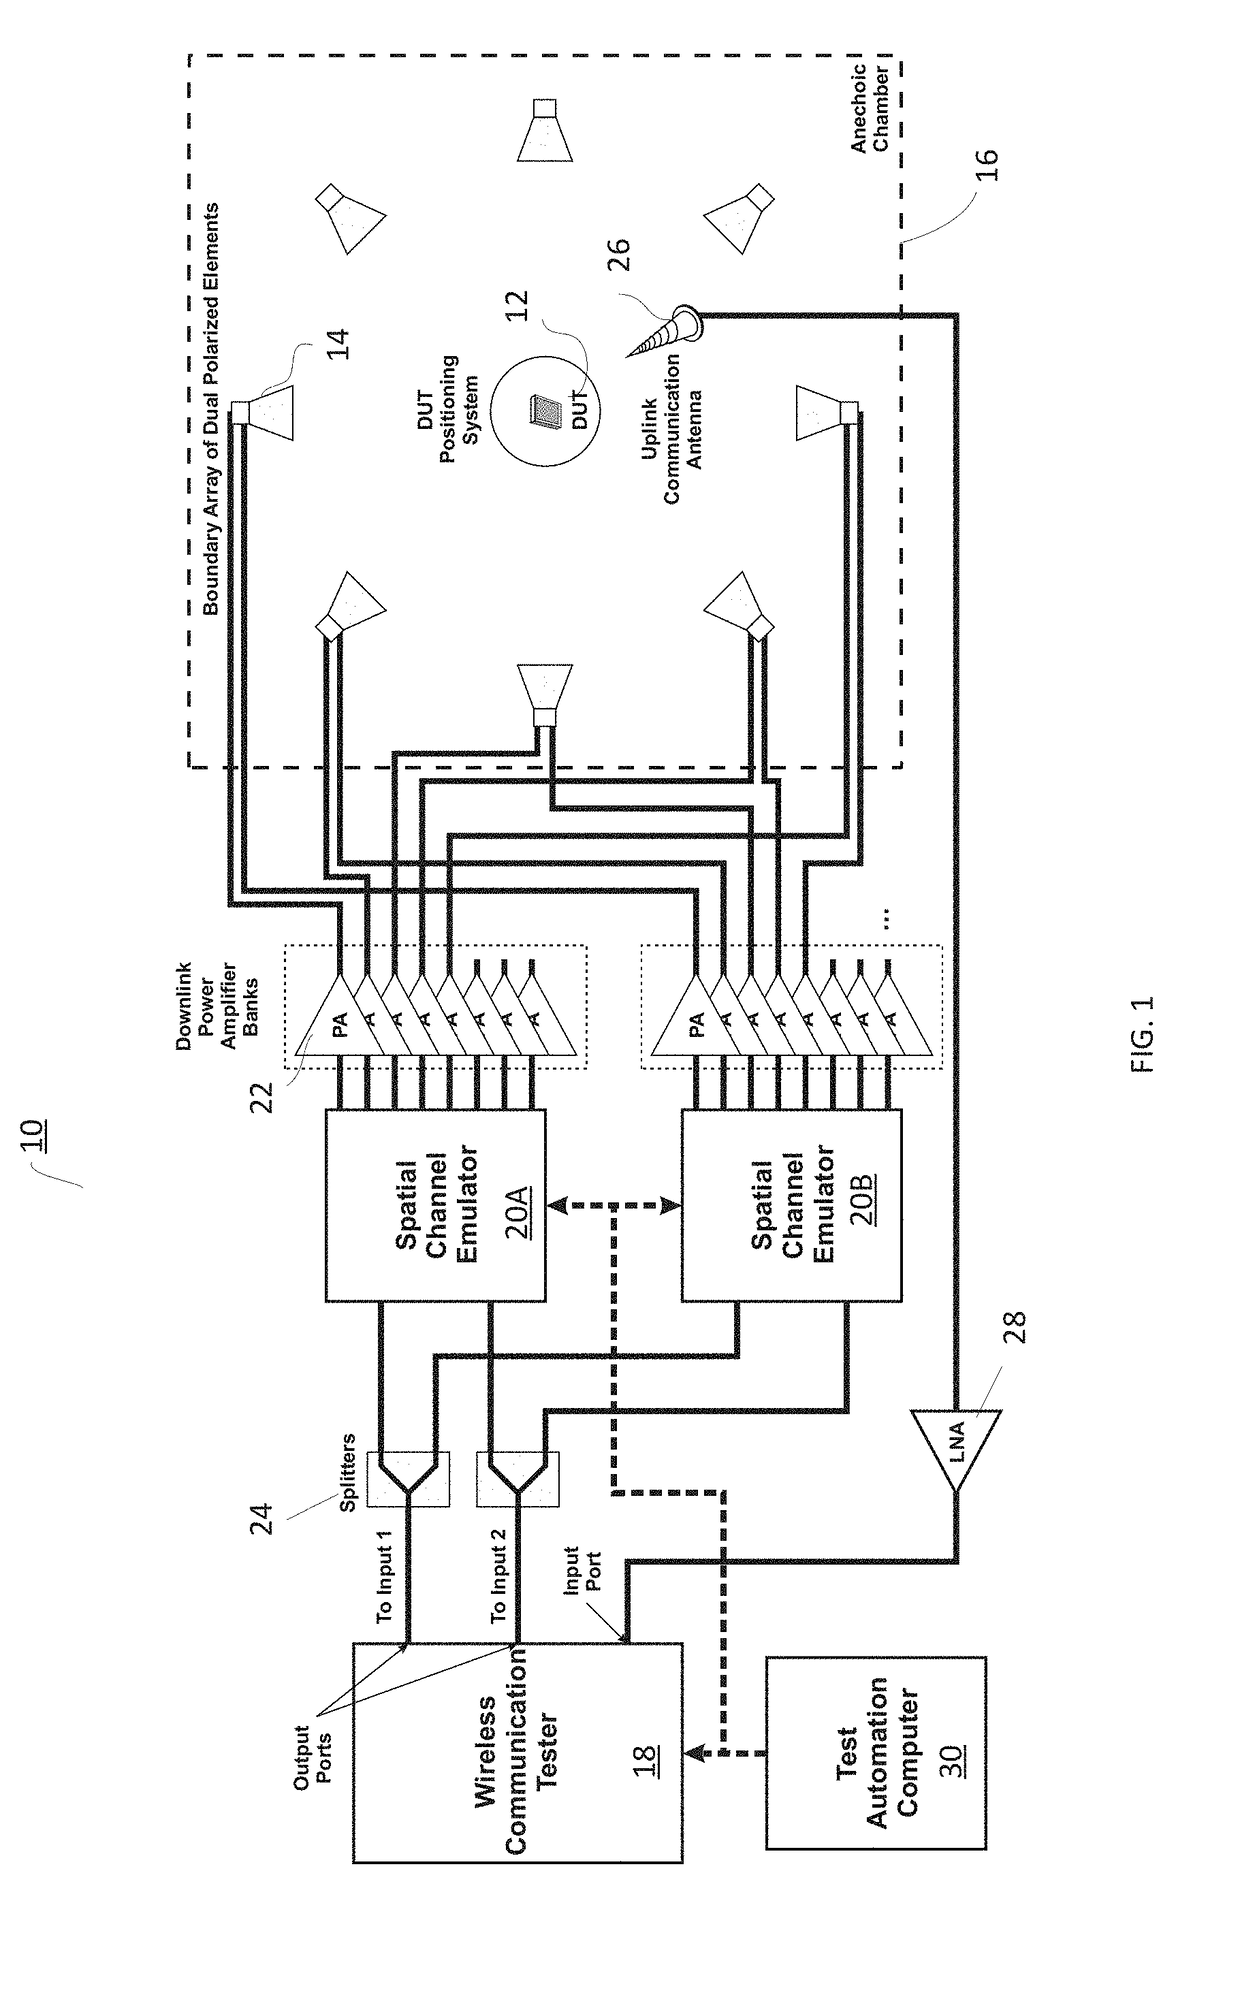 System and method for power control of an over-the-air RF environment emulator